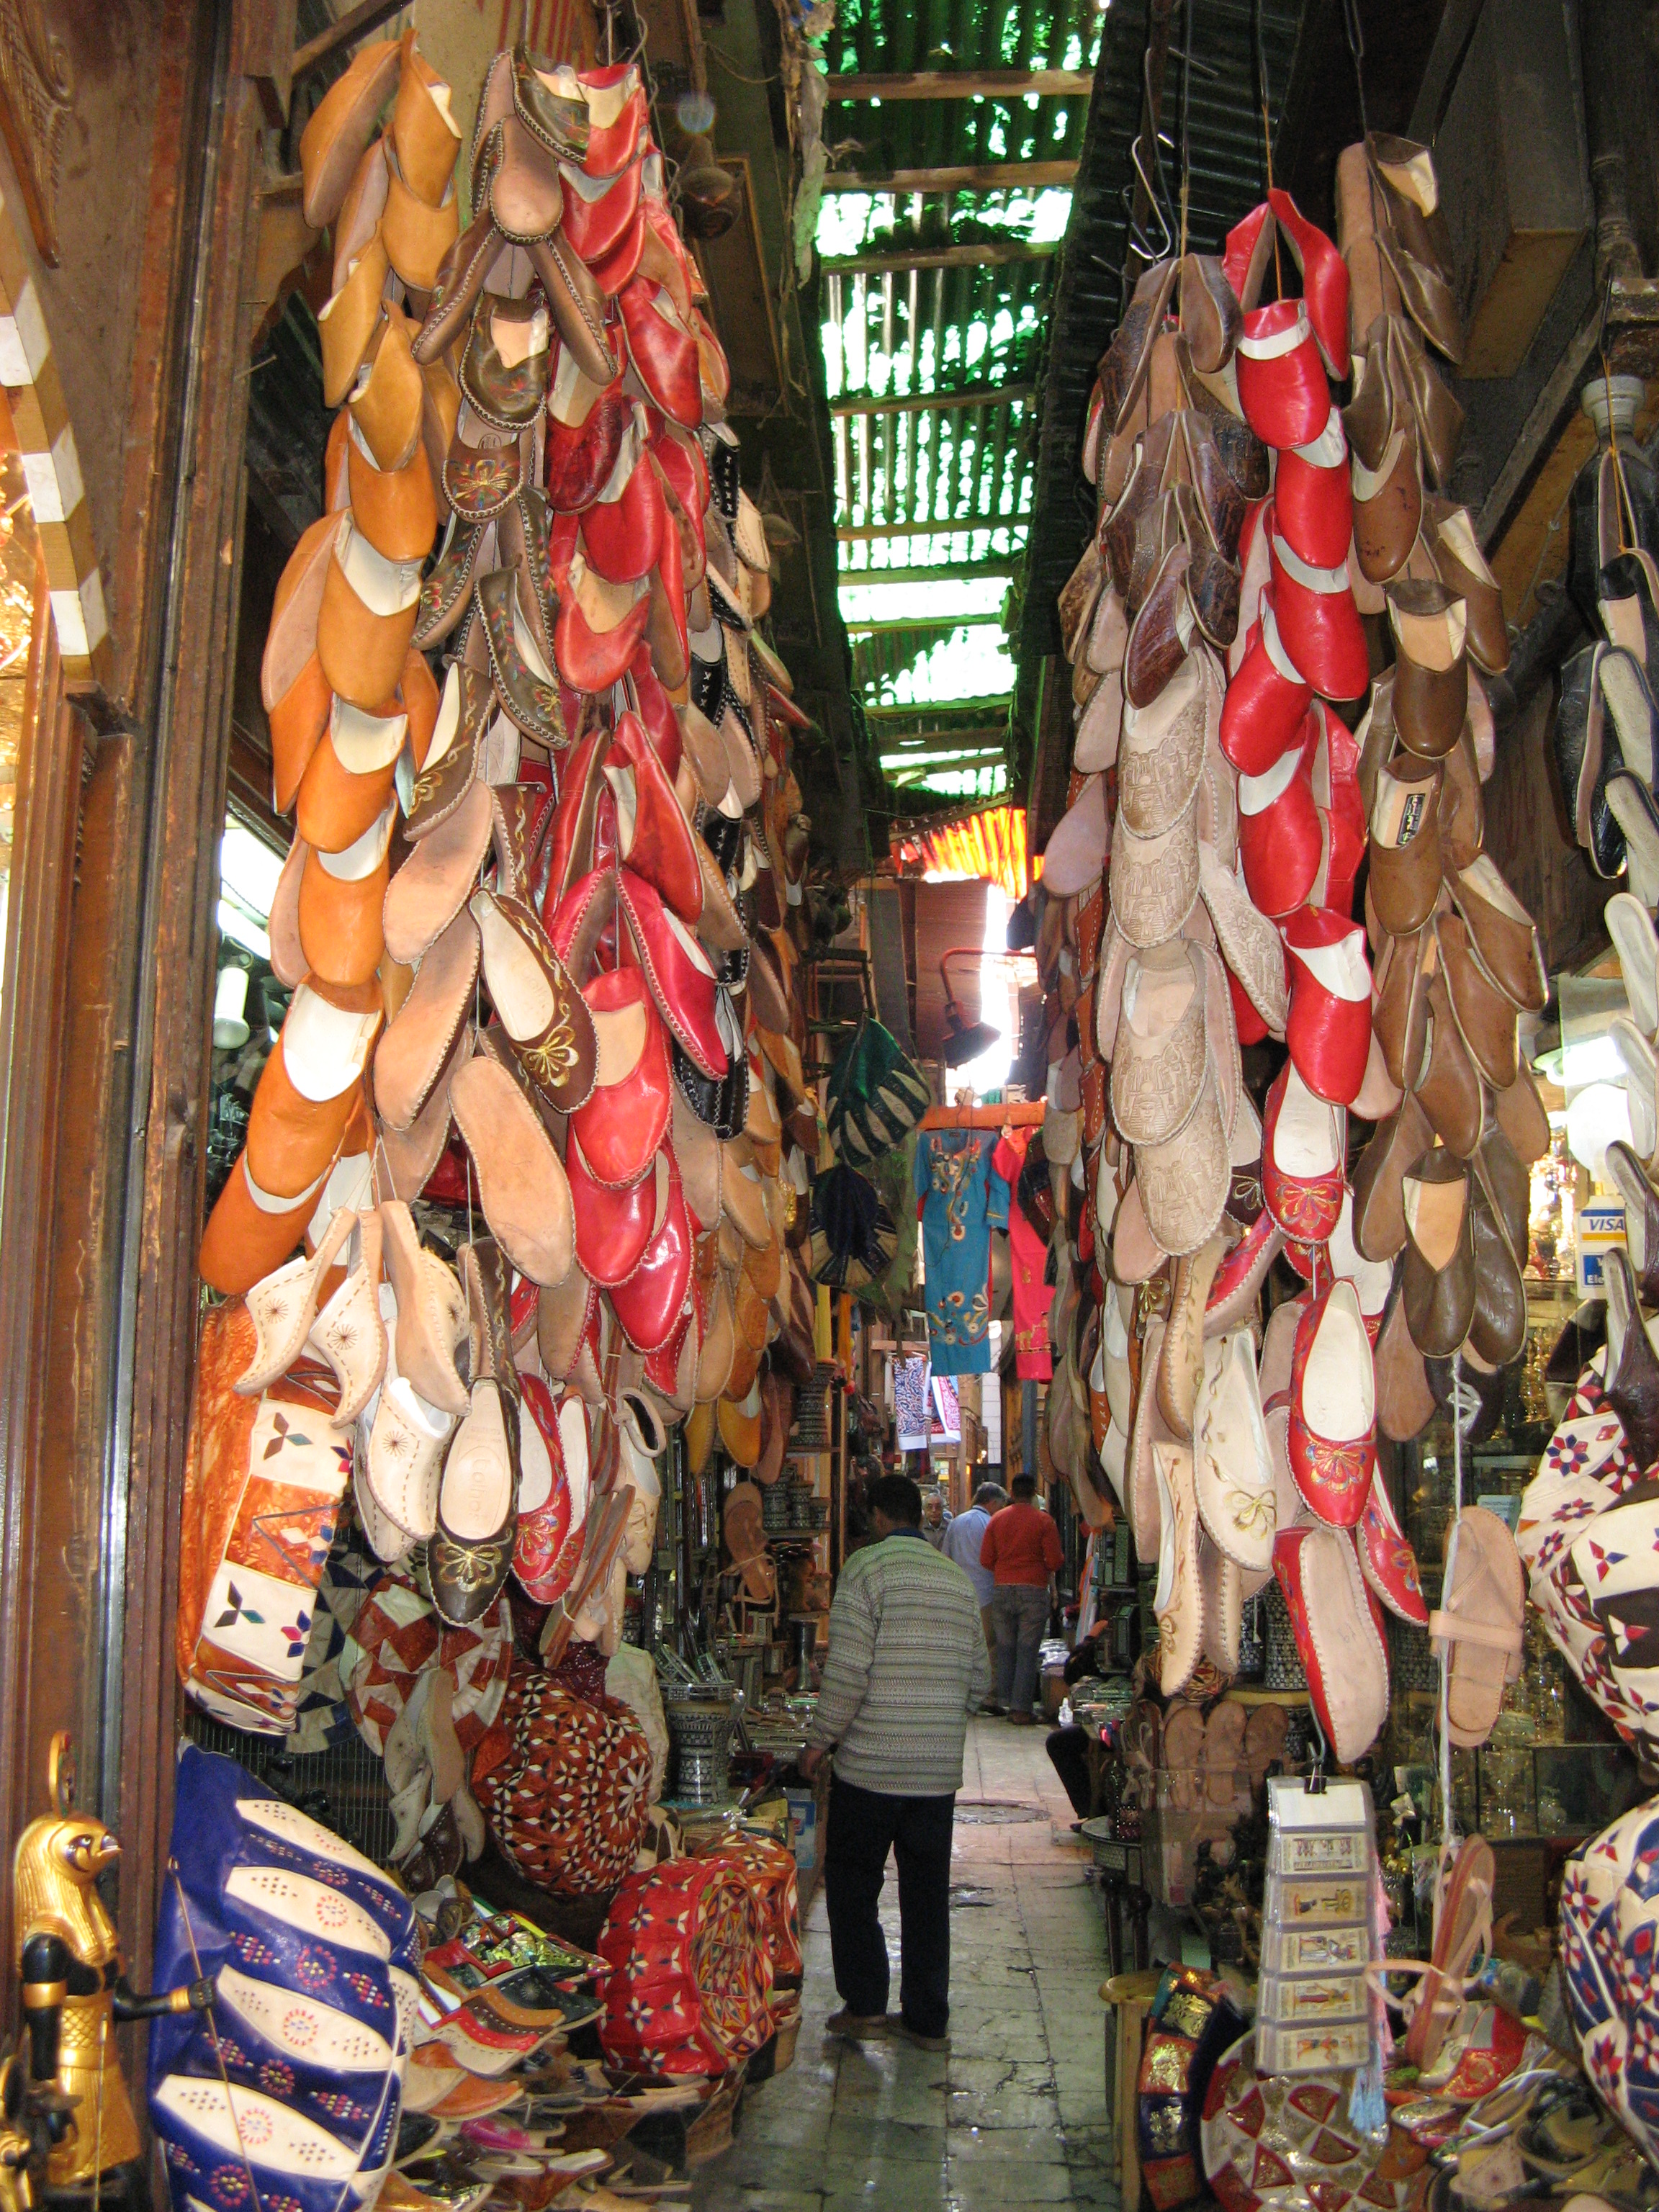  Of of many rows of stalls in the Khalili Bazaar, Cairo 